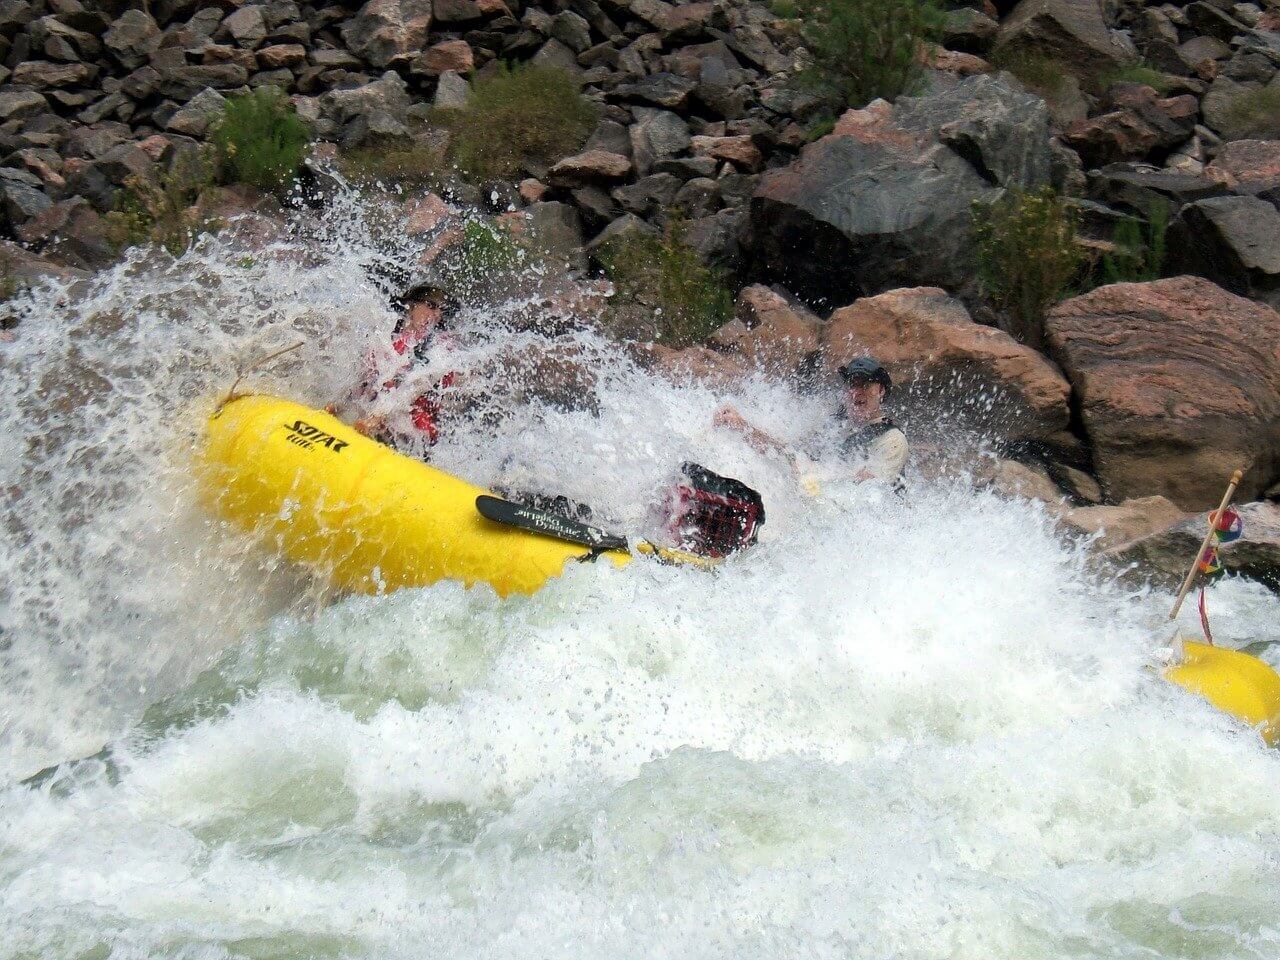 What to Do if You Fall Out While Rafting